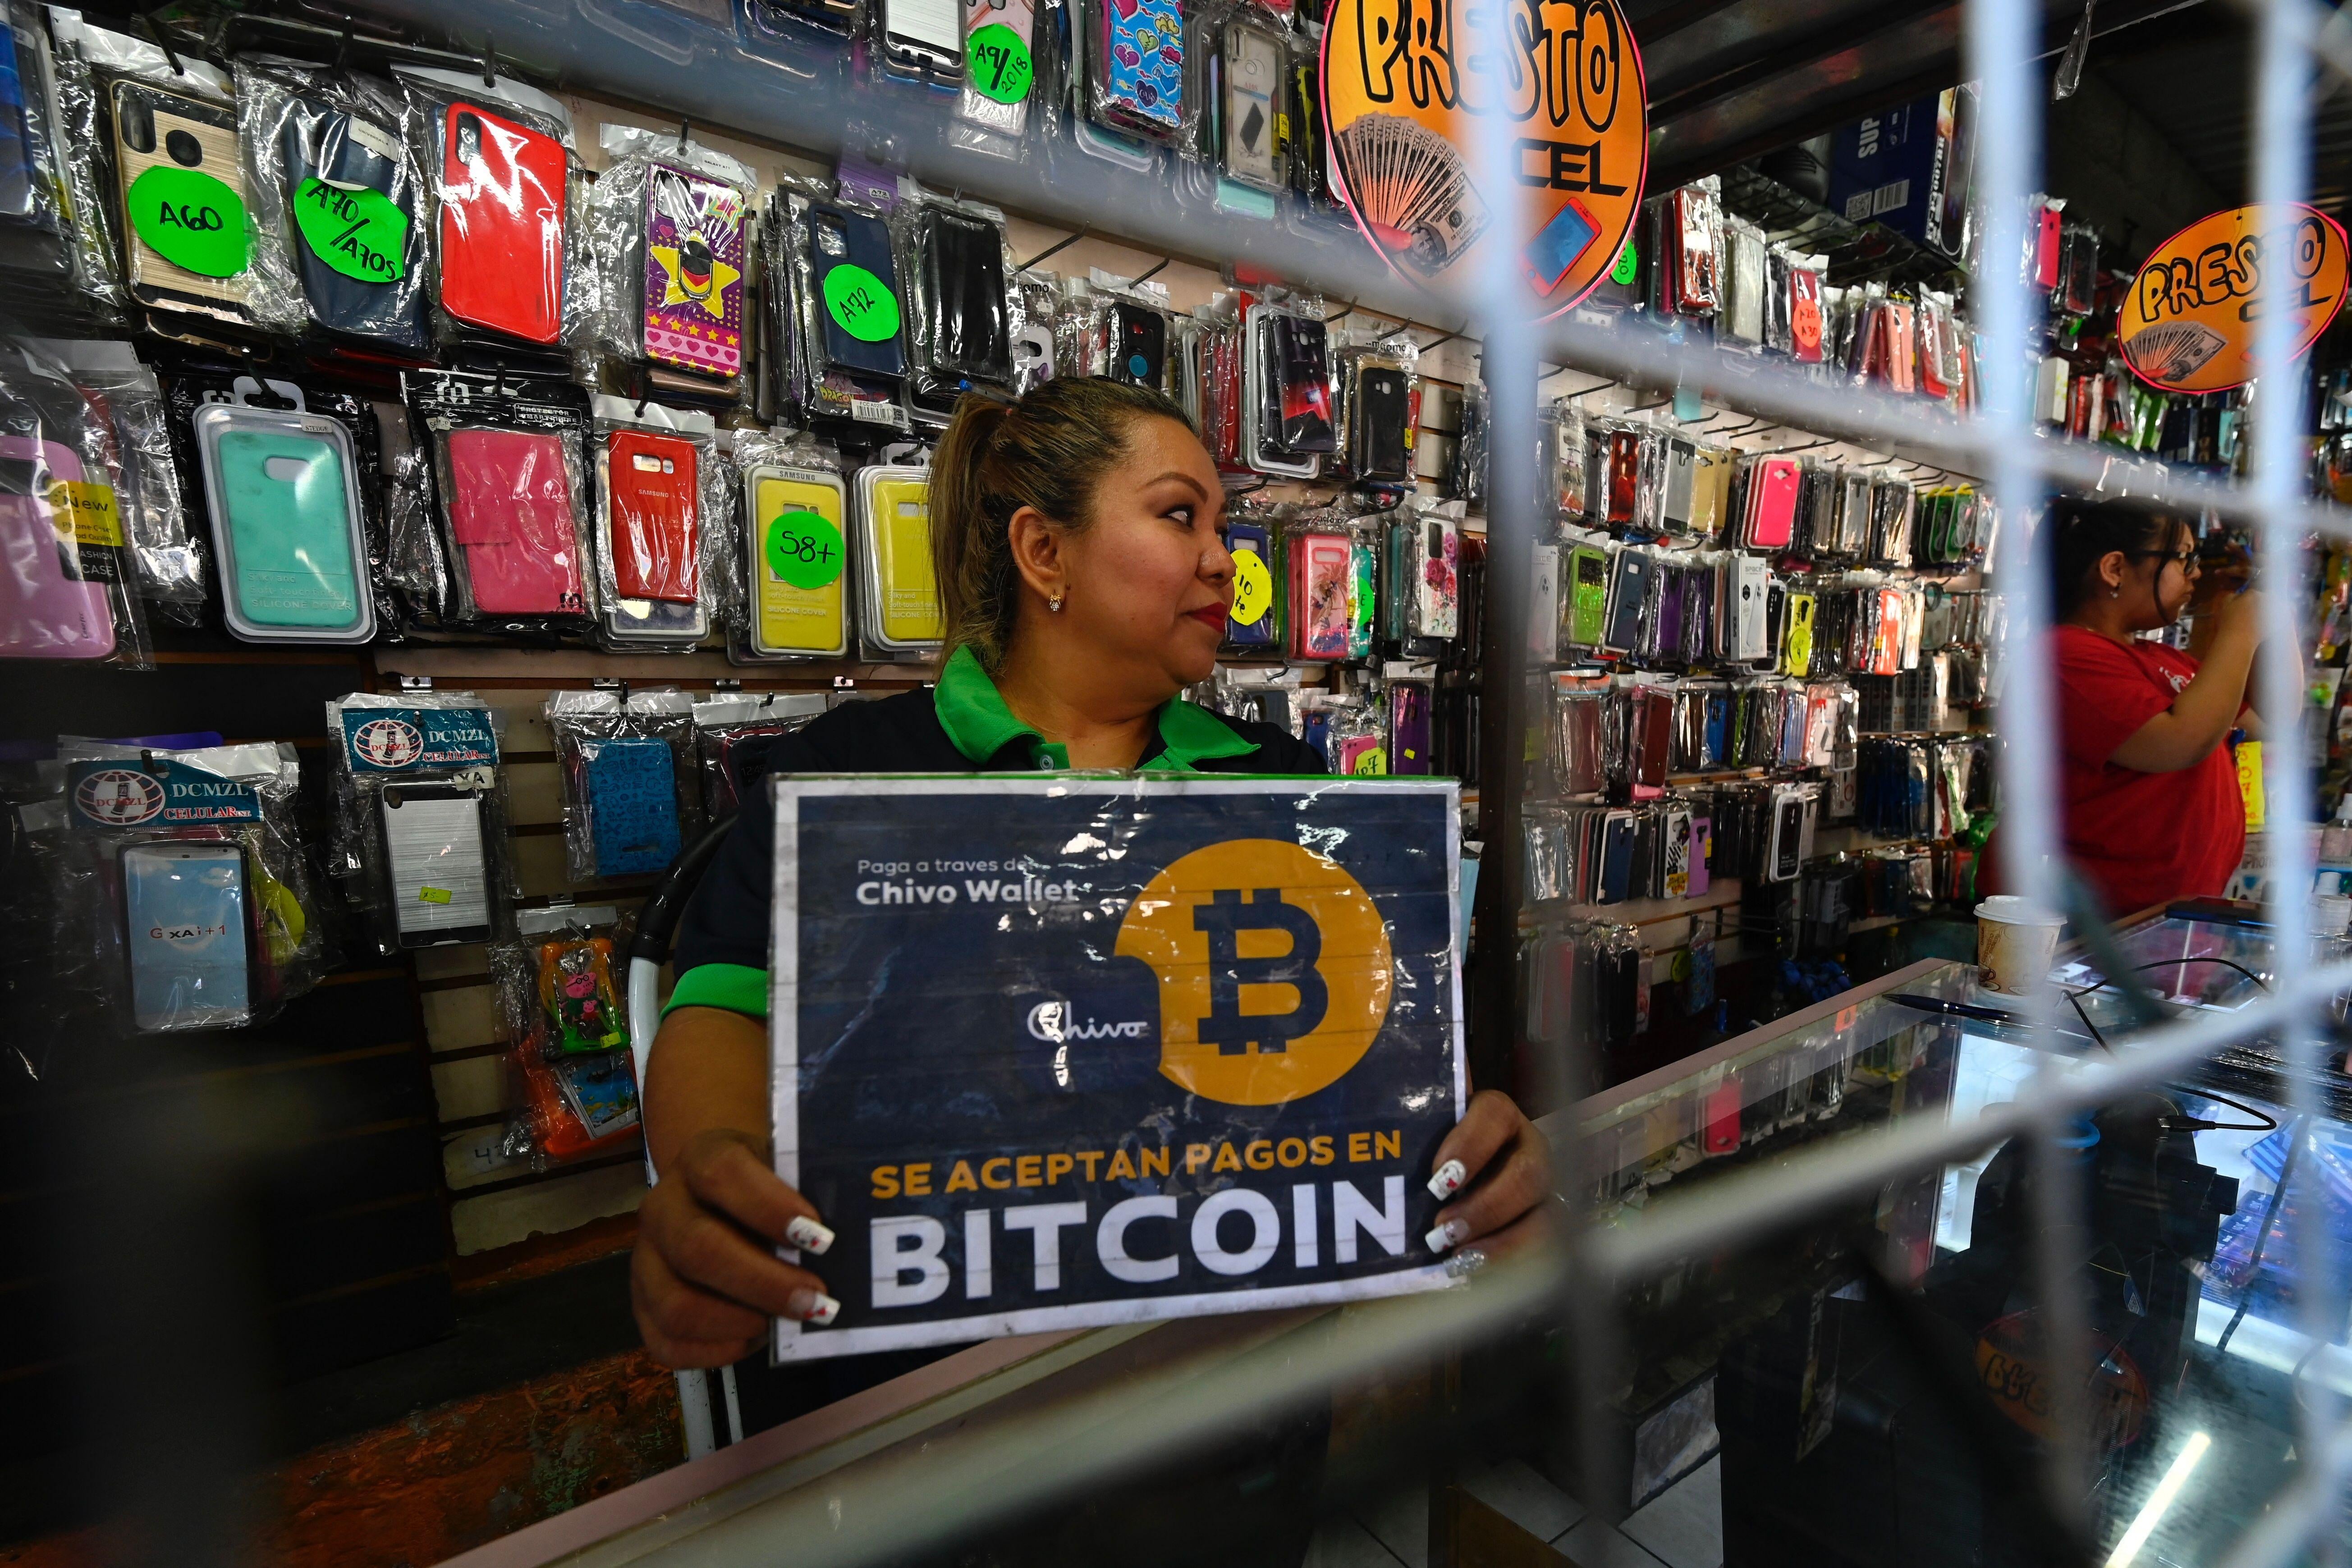 A woman holds a sign saying "Bitcoin Accepted" at a counter in front of a wall of products.